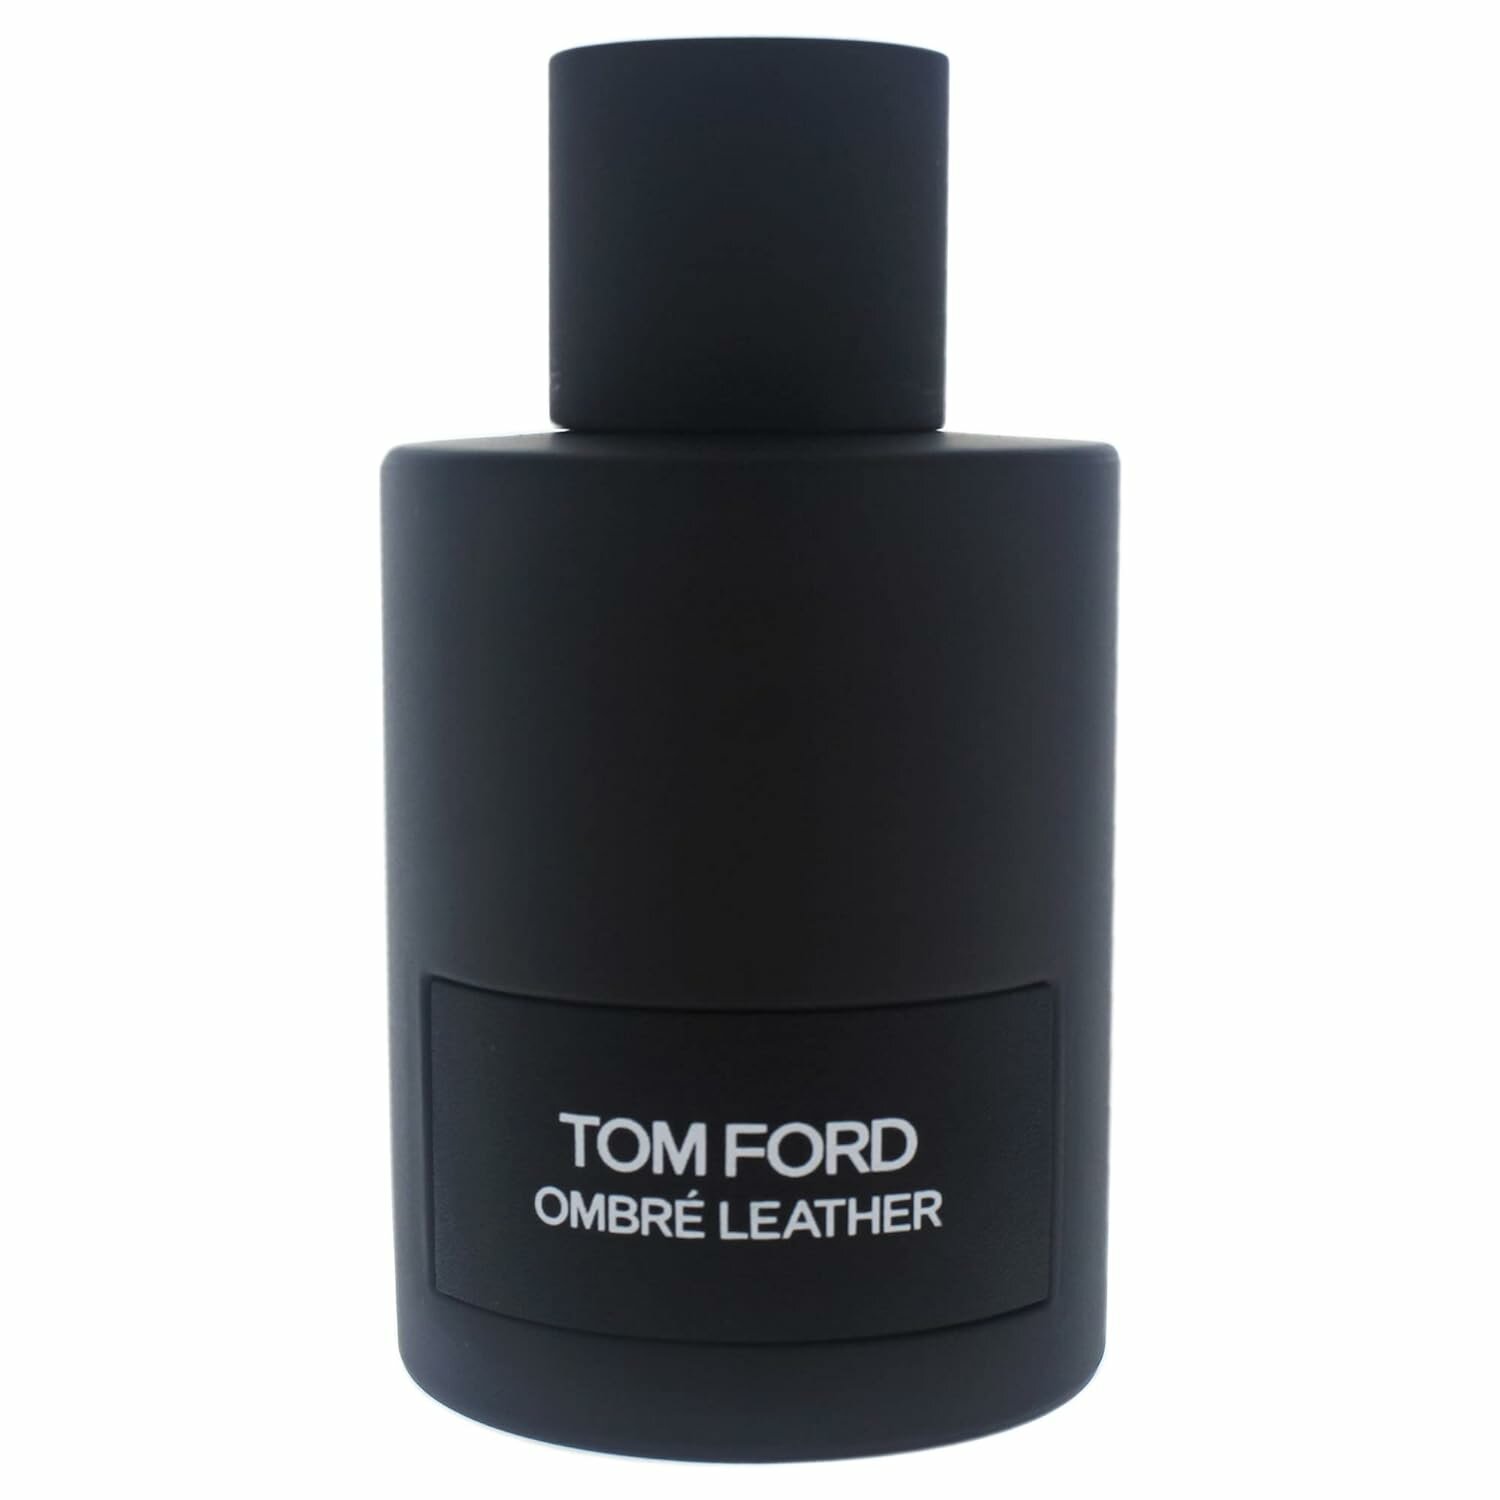 Tom Ford духи Ombre Leather, 50 мл, 100 г